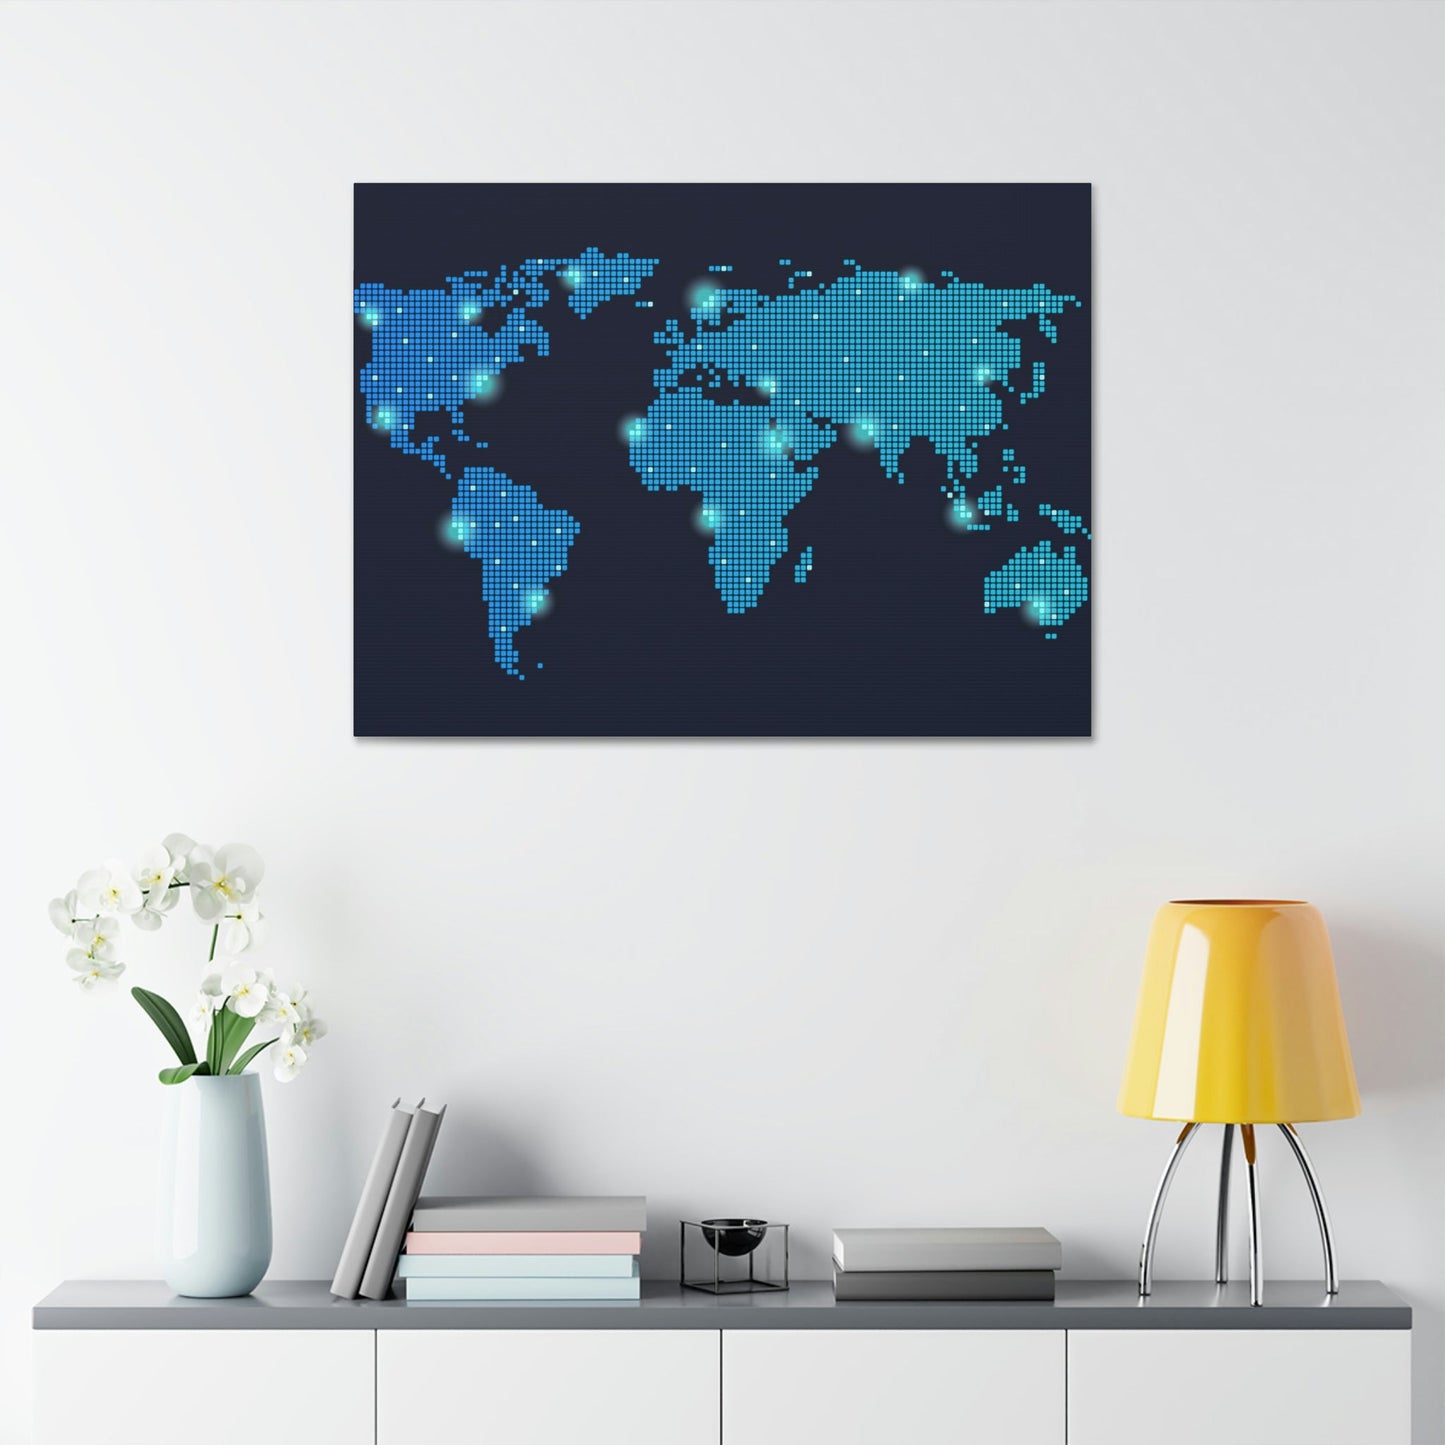 The World in Color: Framed Canvas of Colorful Political Maps